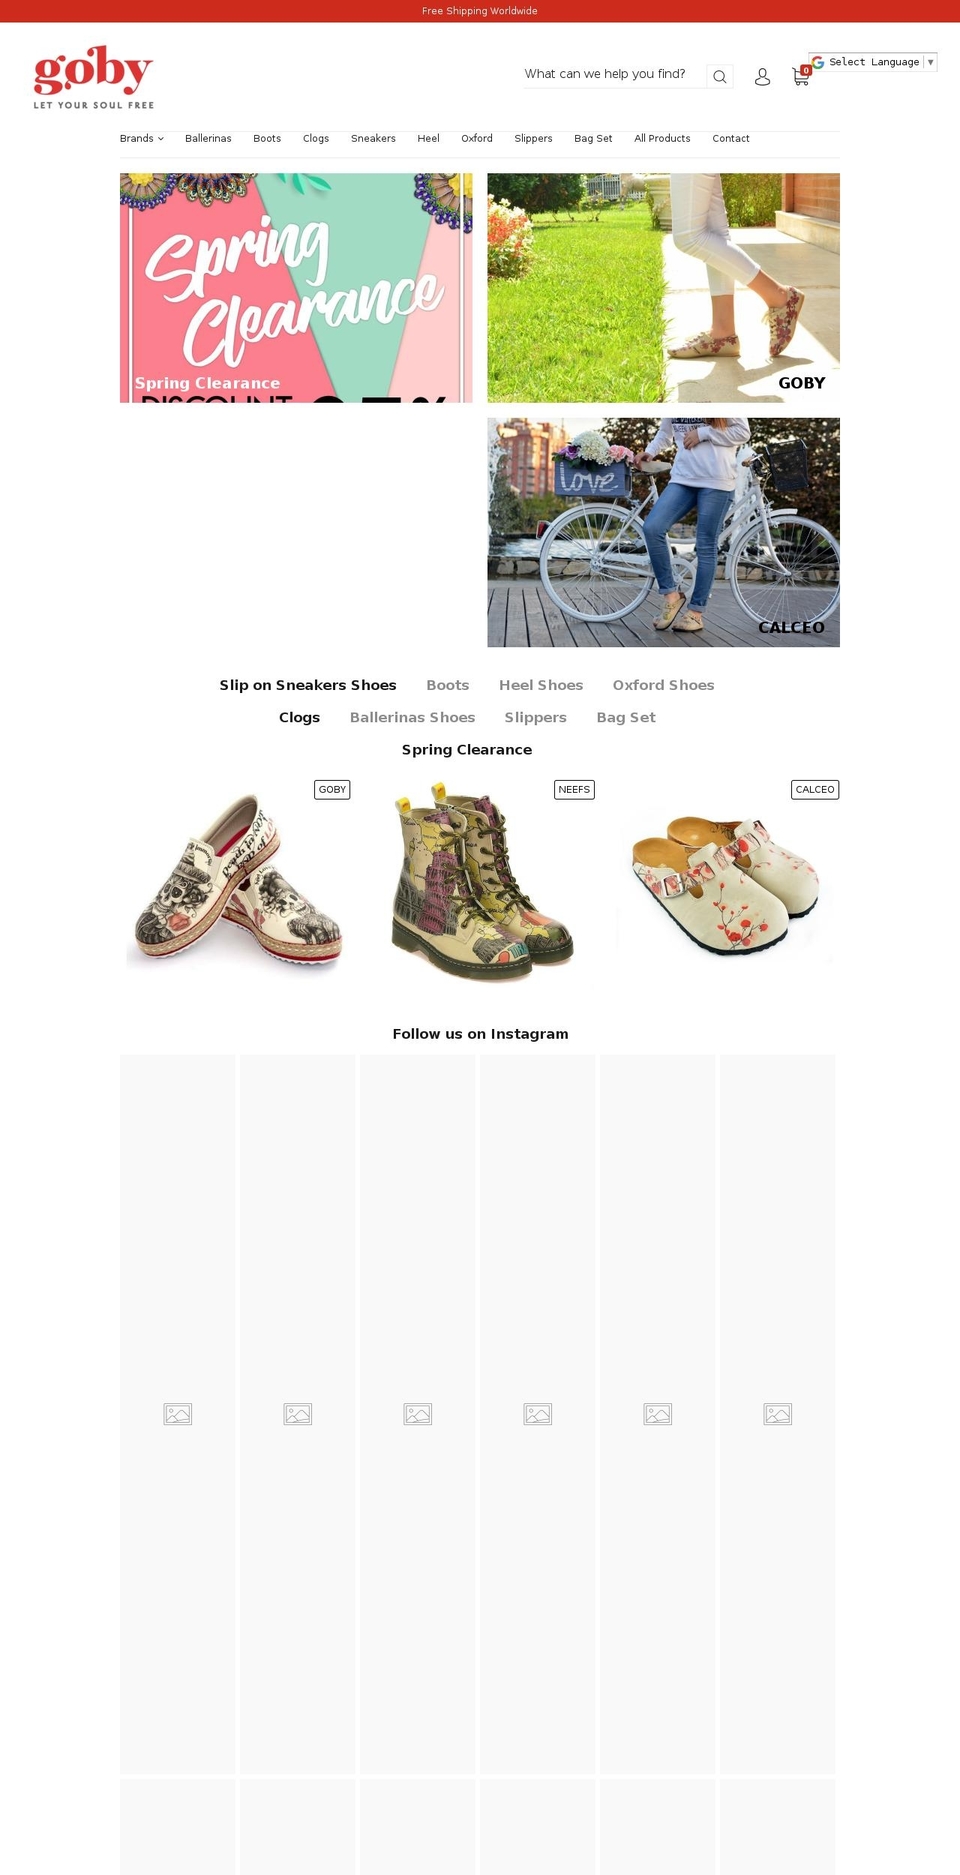 shoes Shopify theme site example shopgoby.com